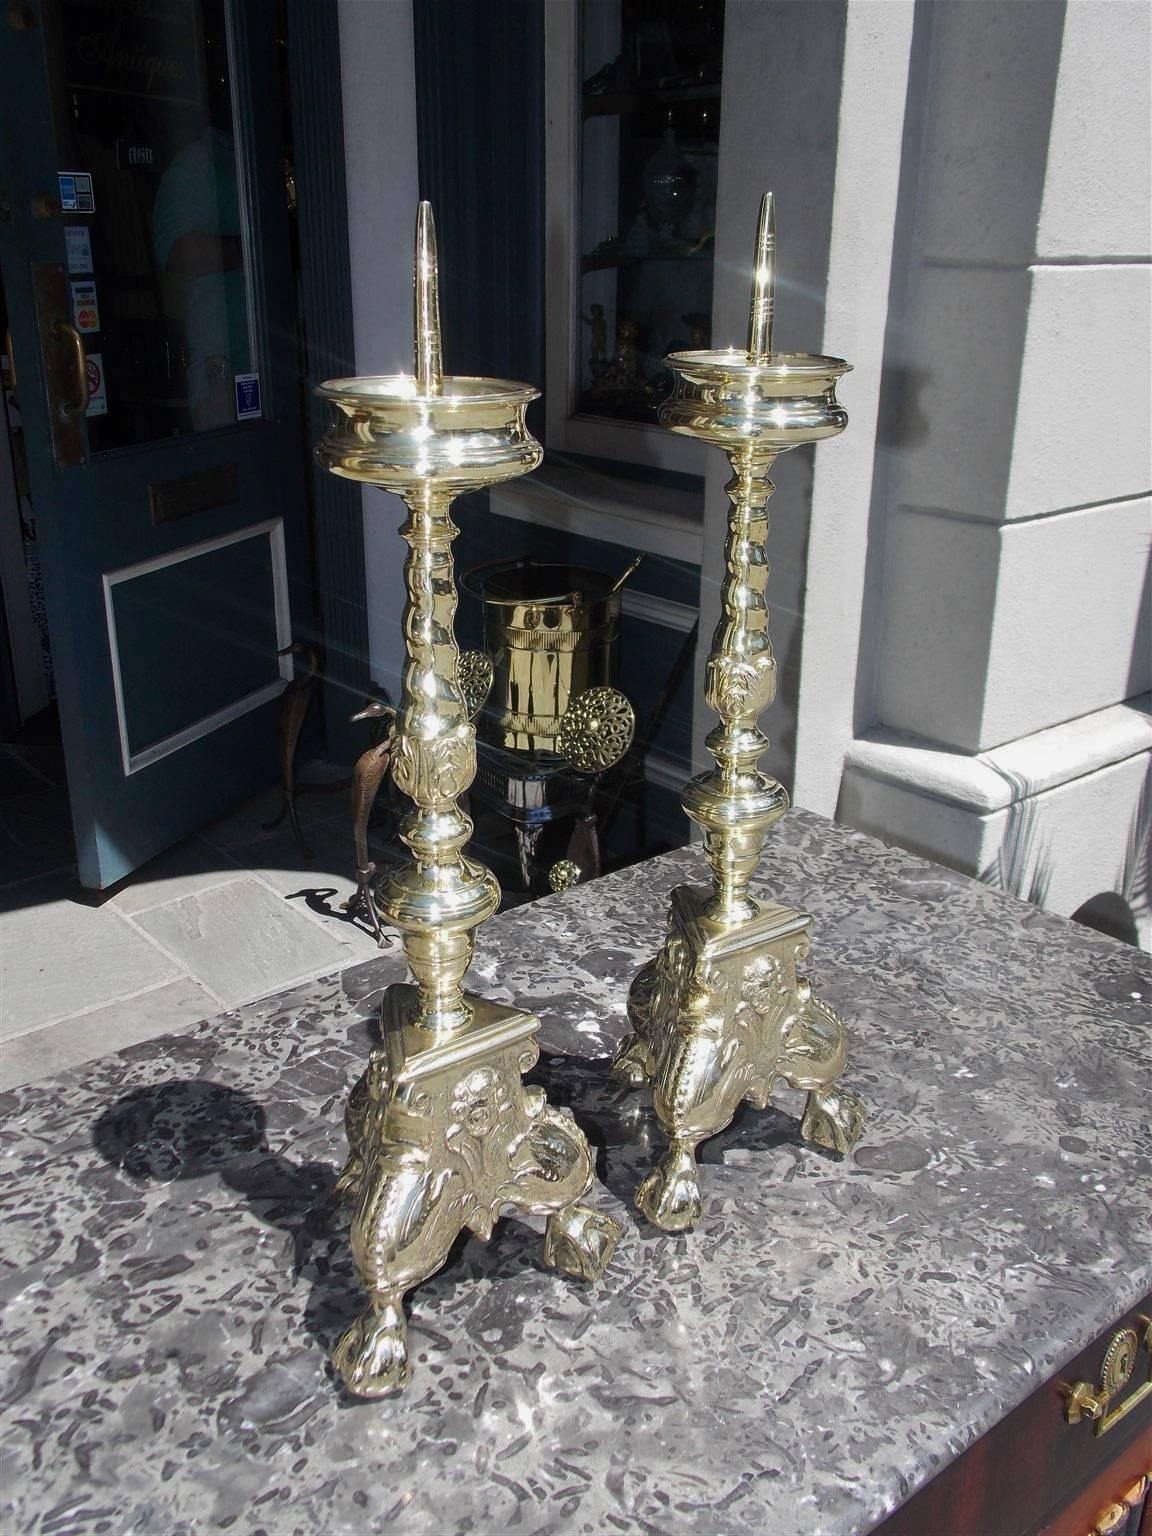 Pair of Italian brass prickets with upper ringed bobeches, centered candle spikes, turned bulbous decorative spiral floral columns, supported on triangular figural foliage beaded knee bases, with ball and claw feet. Mid-18th century.